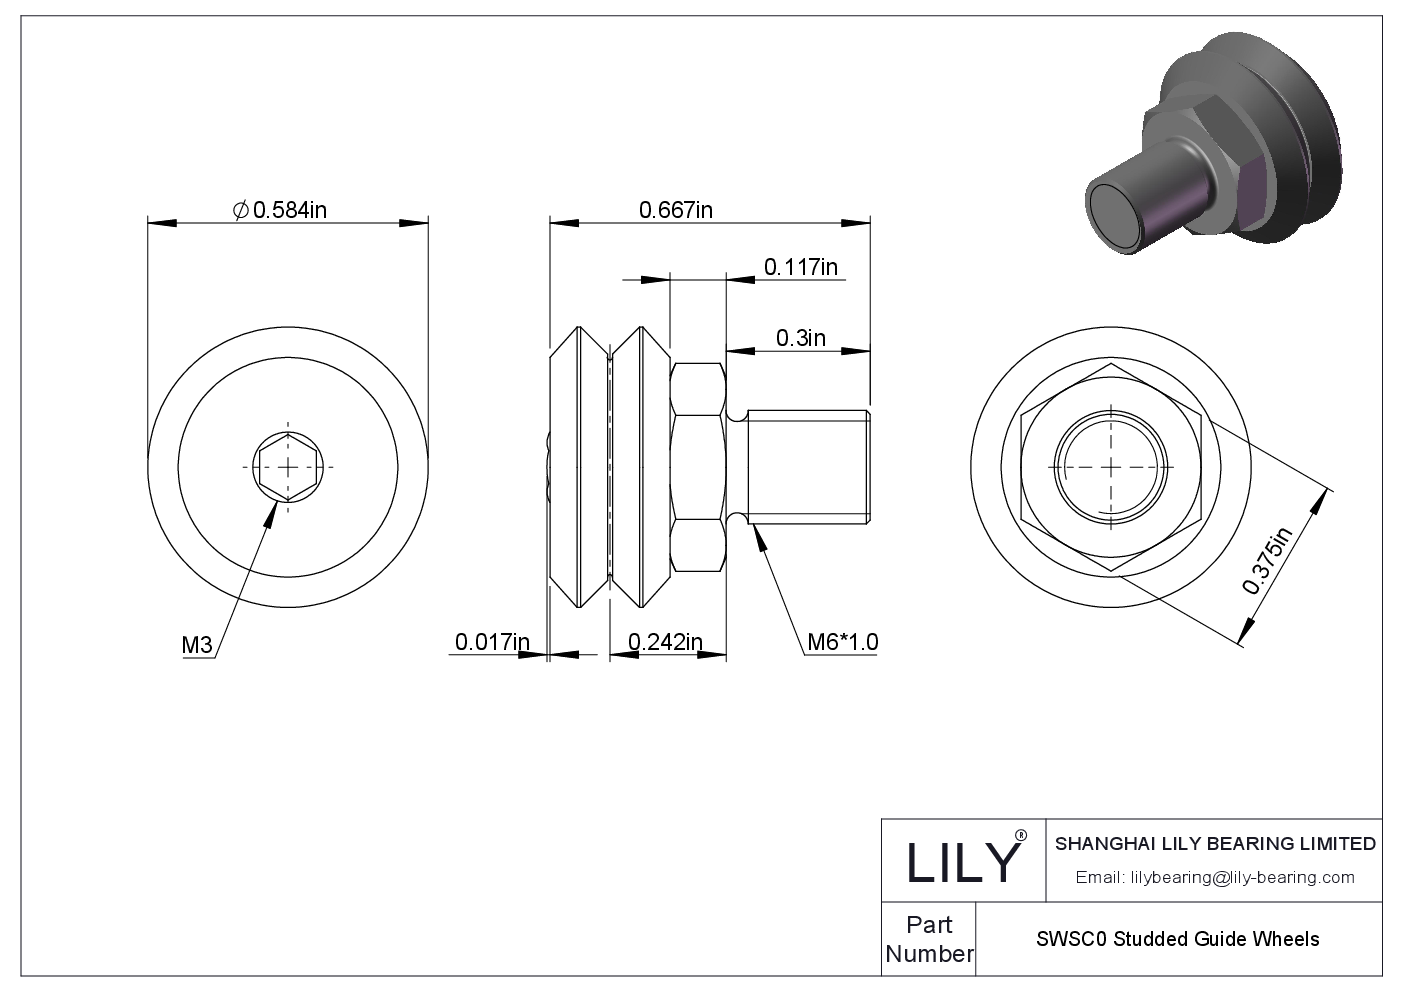 SWSC0 Studded Guide Wheels cad drawing